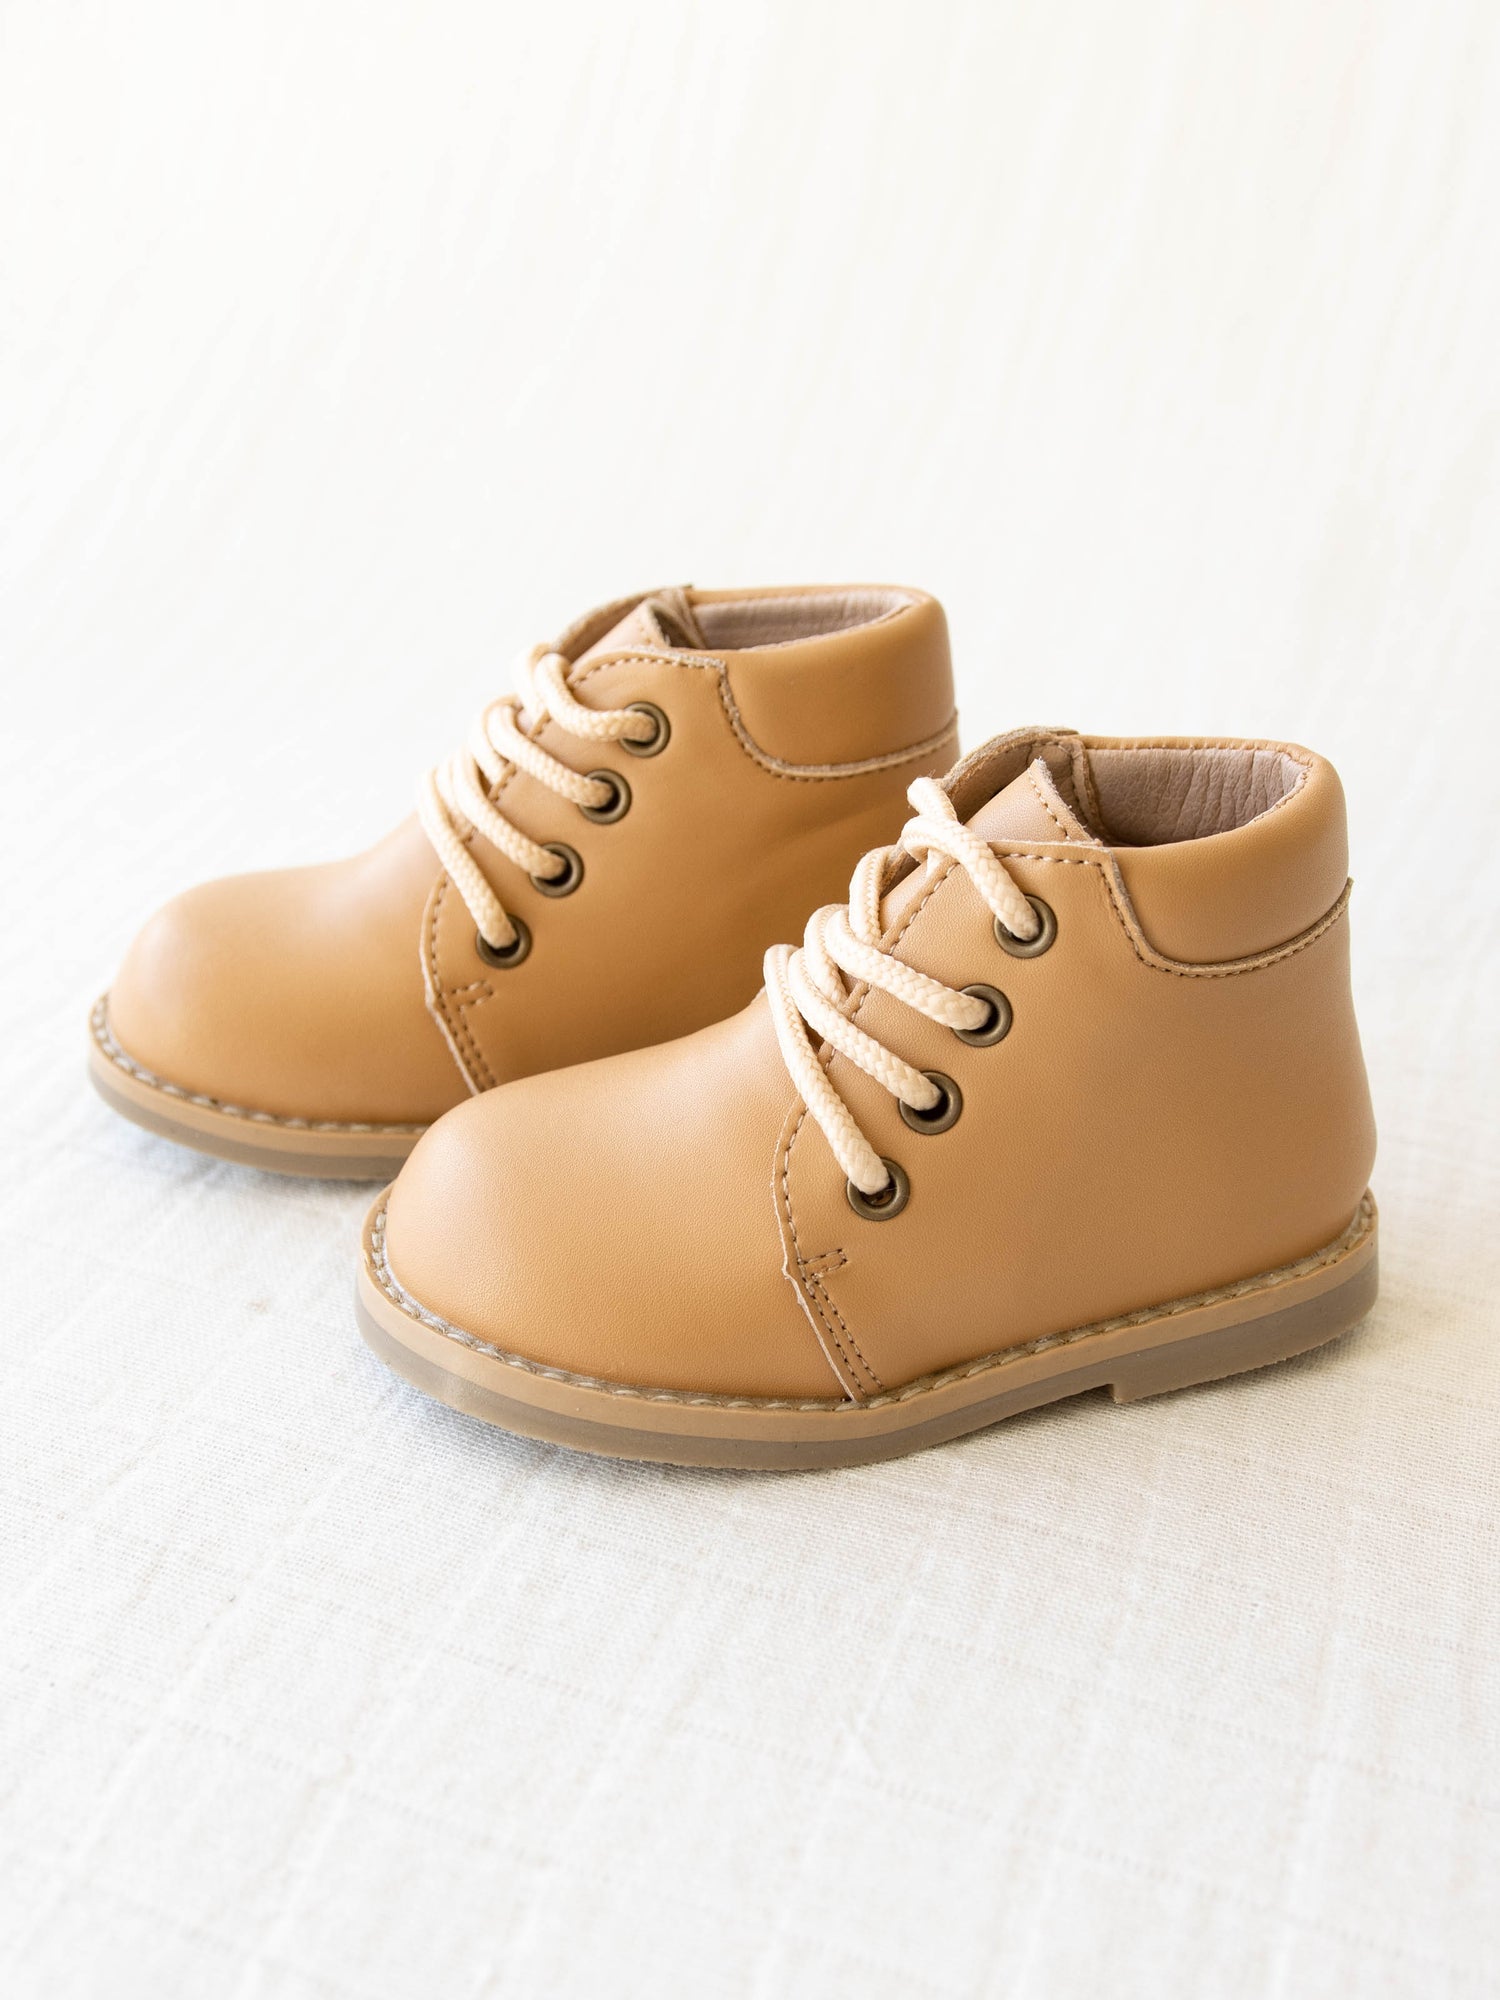 Pair of tan manmade leather Lace Up Ankle Boots with metal grommet eyelet holes and rubber soles. 